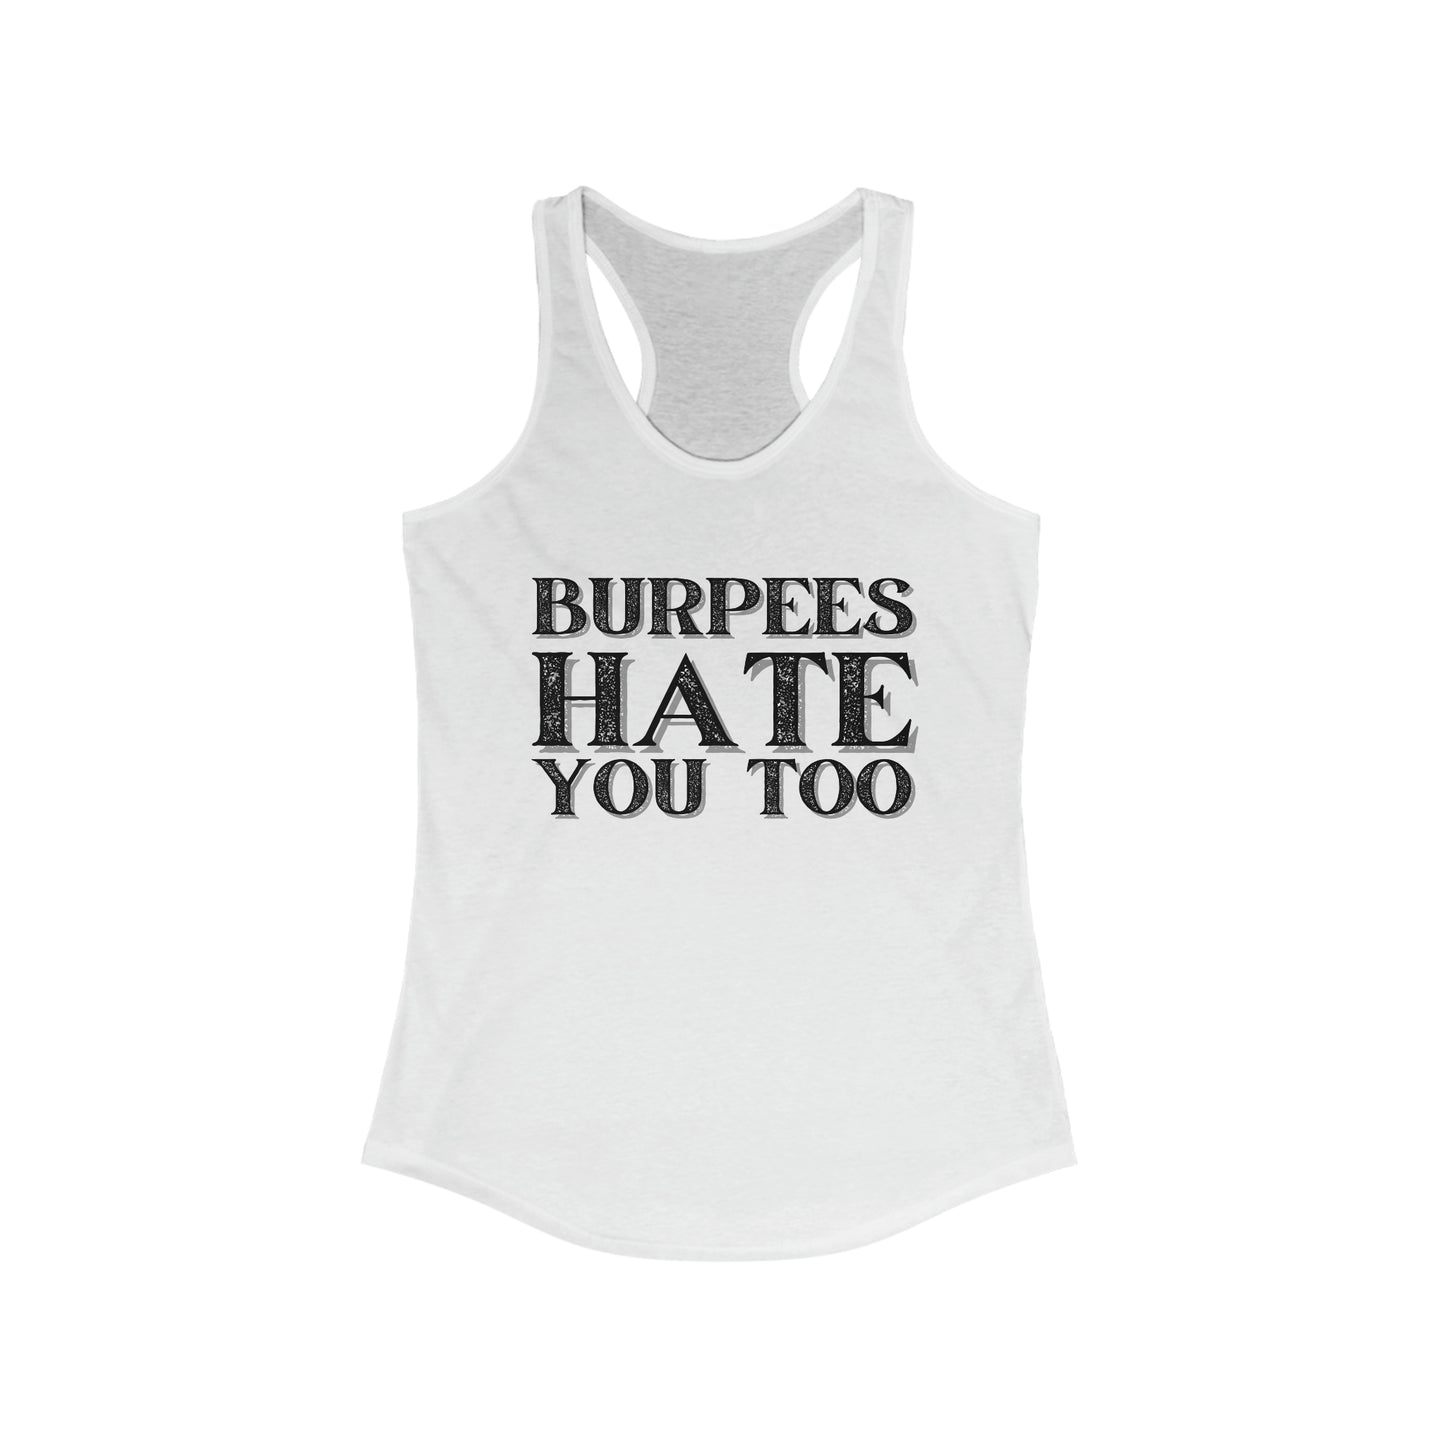 Burpees hate you too tank top